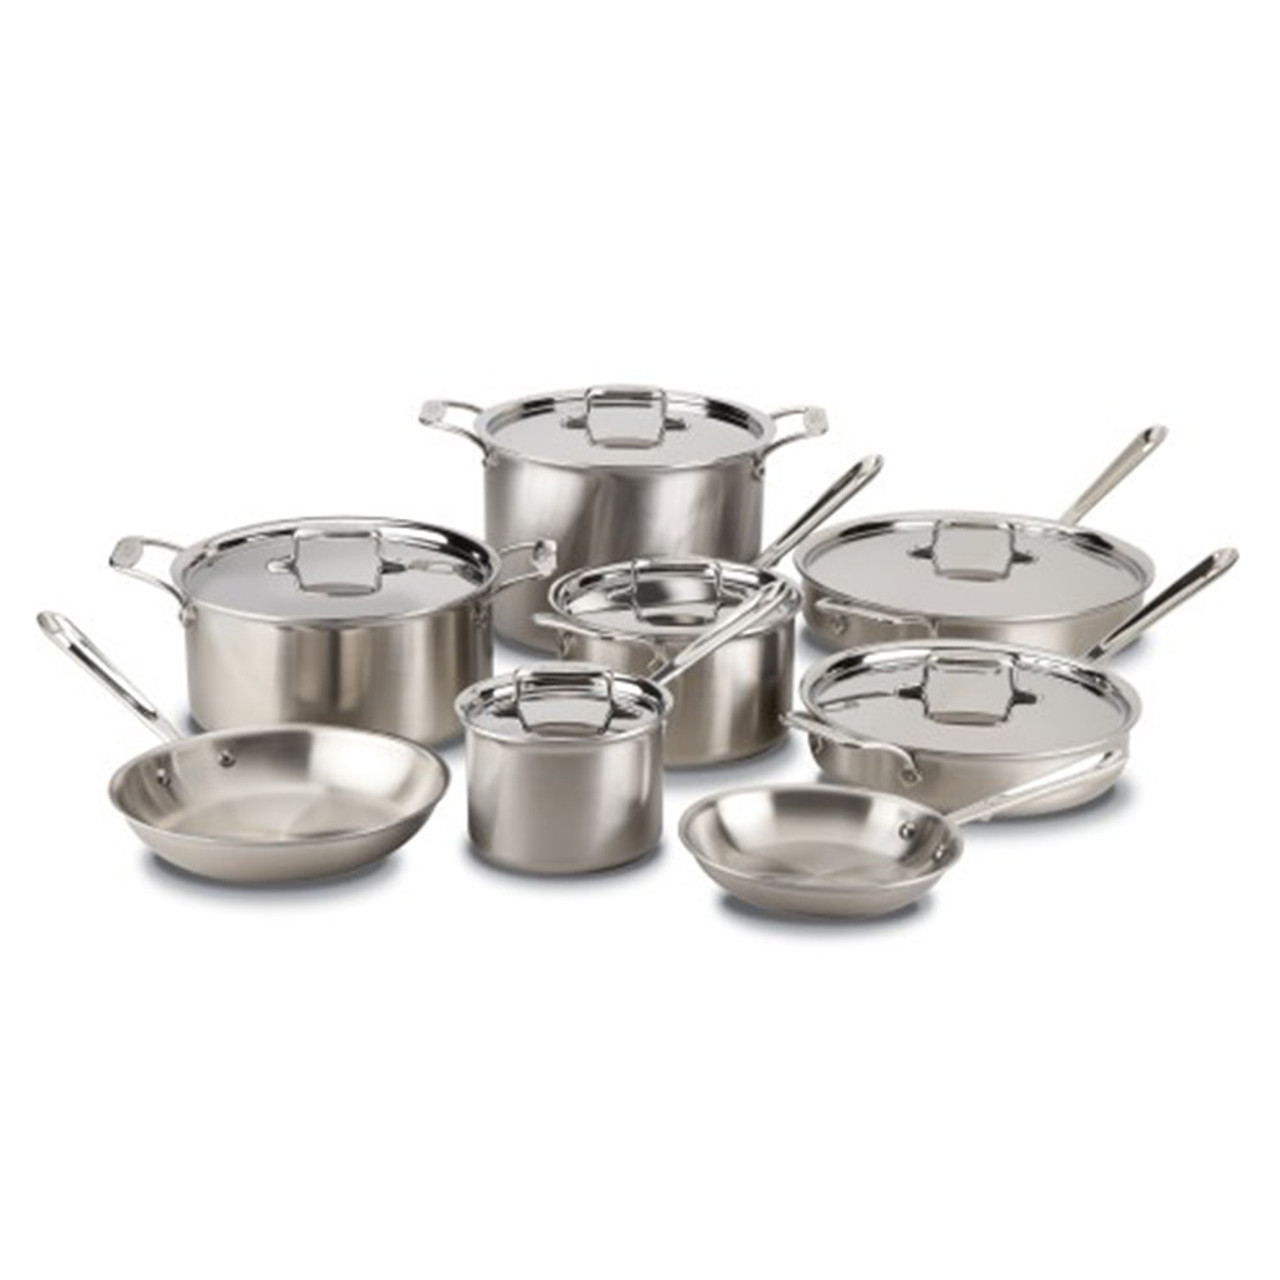 https://cdn11.bigcommerce.com/s-hccytny0od/images/stencil/1280x1280/products/475/1735/all-clad-d5-14-piece-cookware-set__57345.1510924315.jpg?c=2?imbypass=on